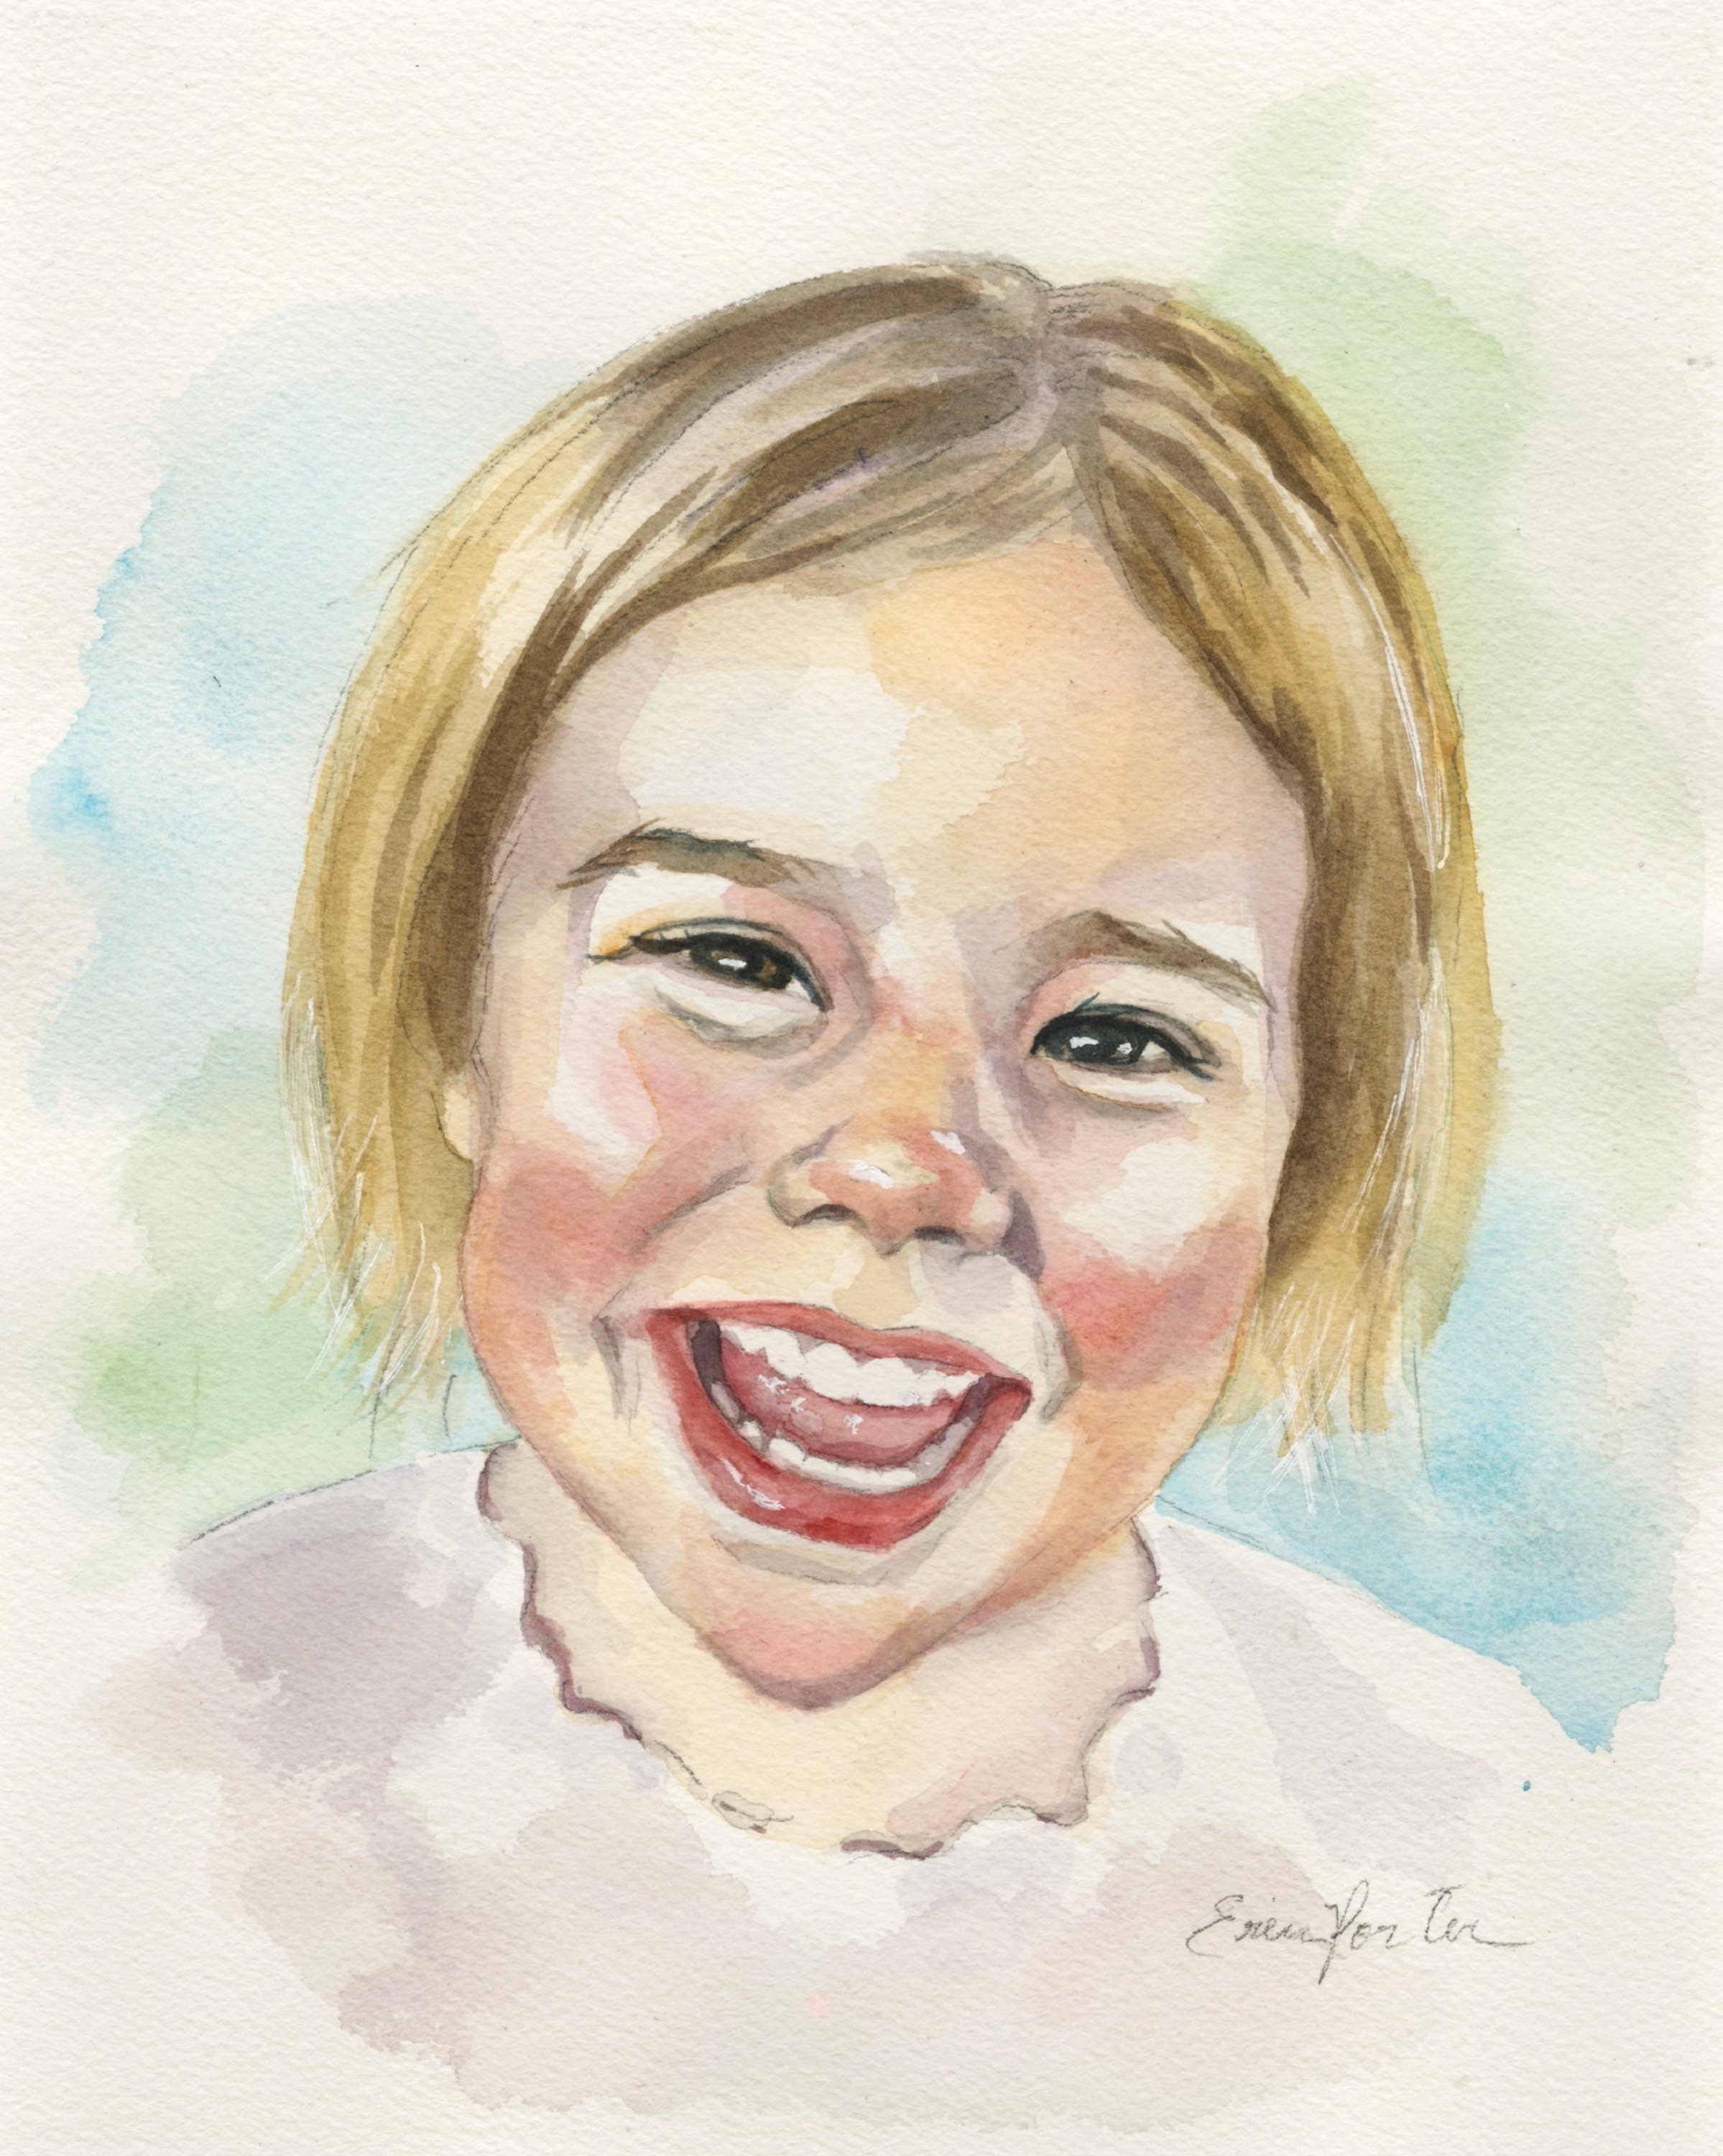 Custom watercolor child portrait,hand painted from photo,original watercolor painting,gift idea,kid portrait,baby portrait,real physical art